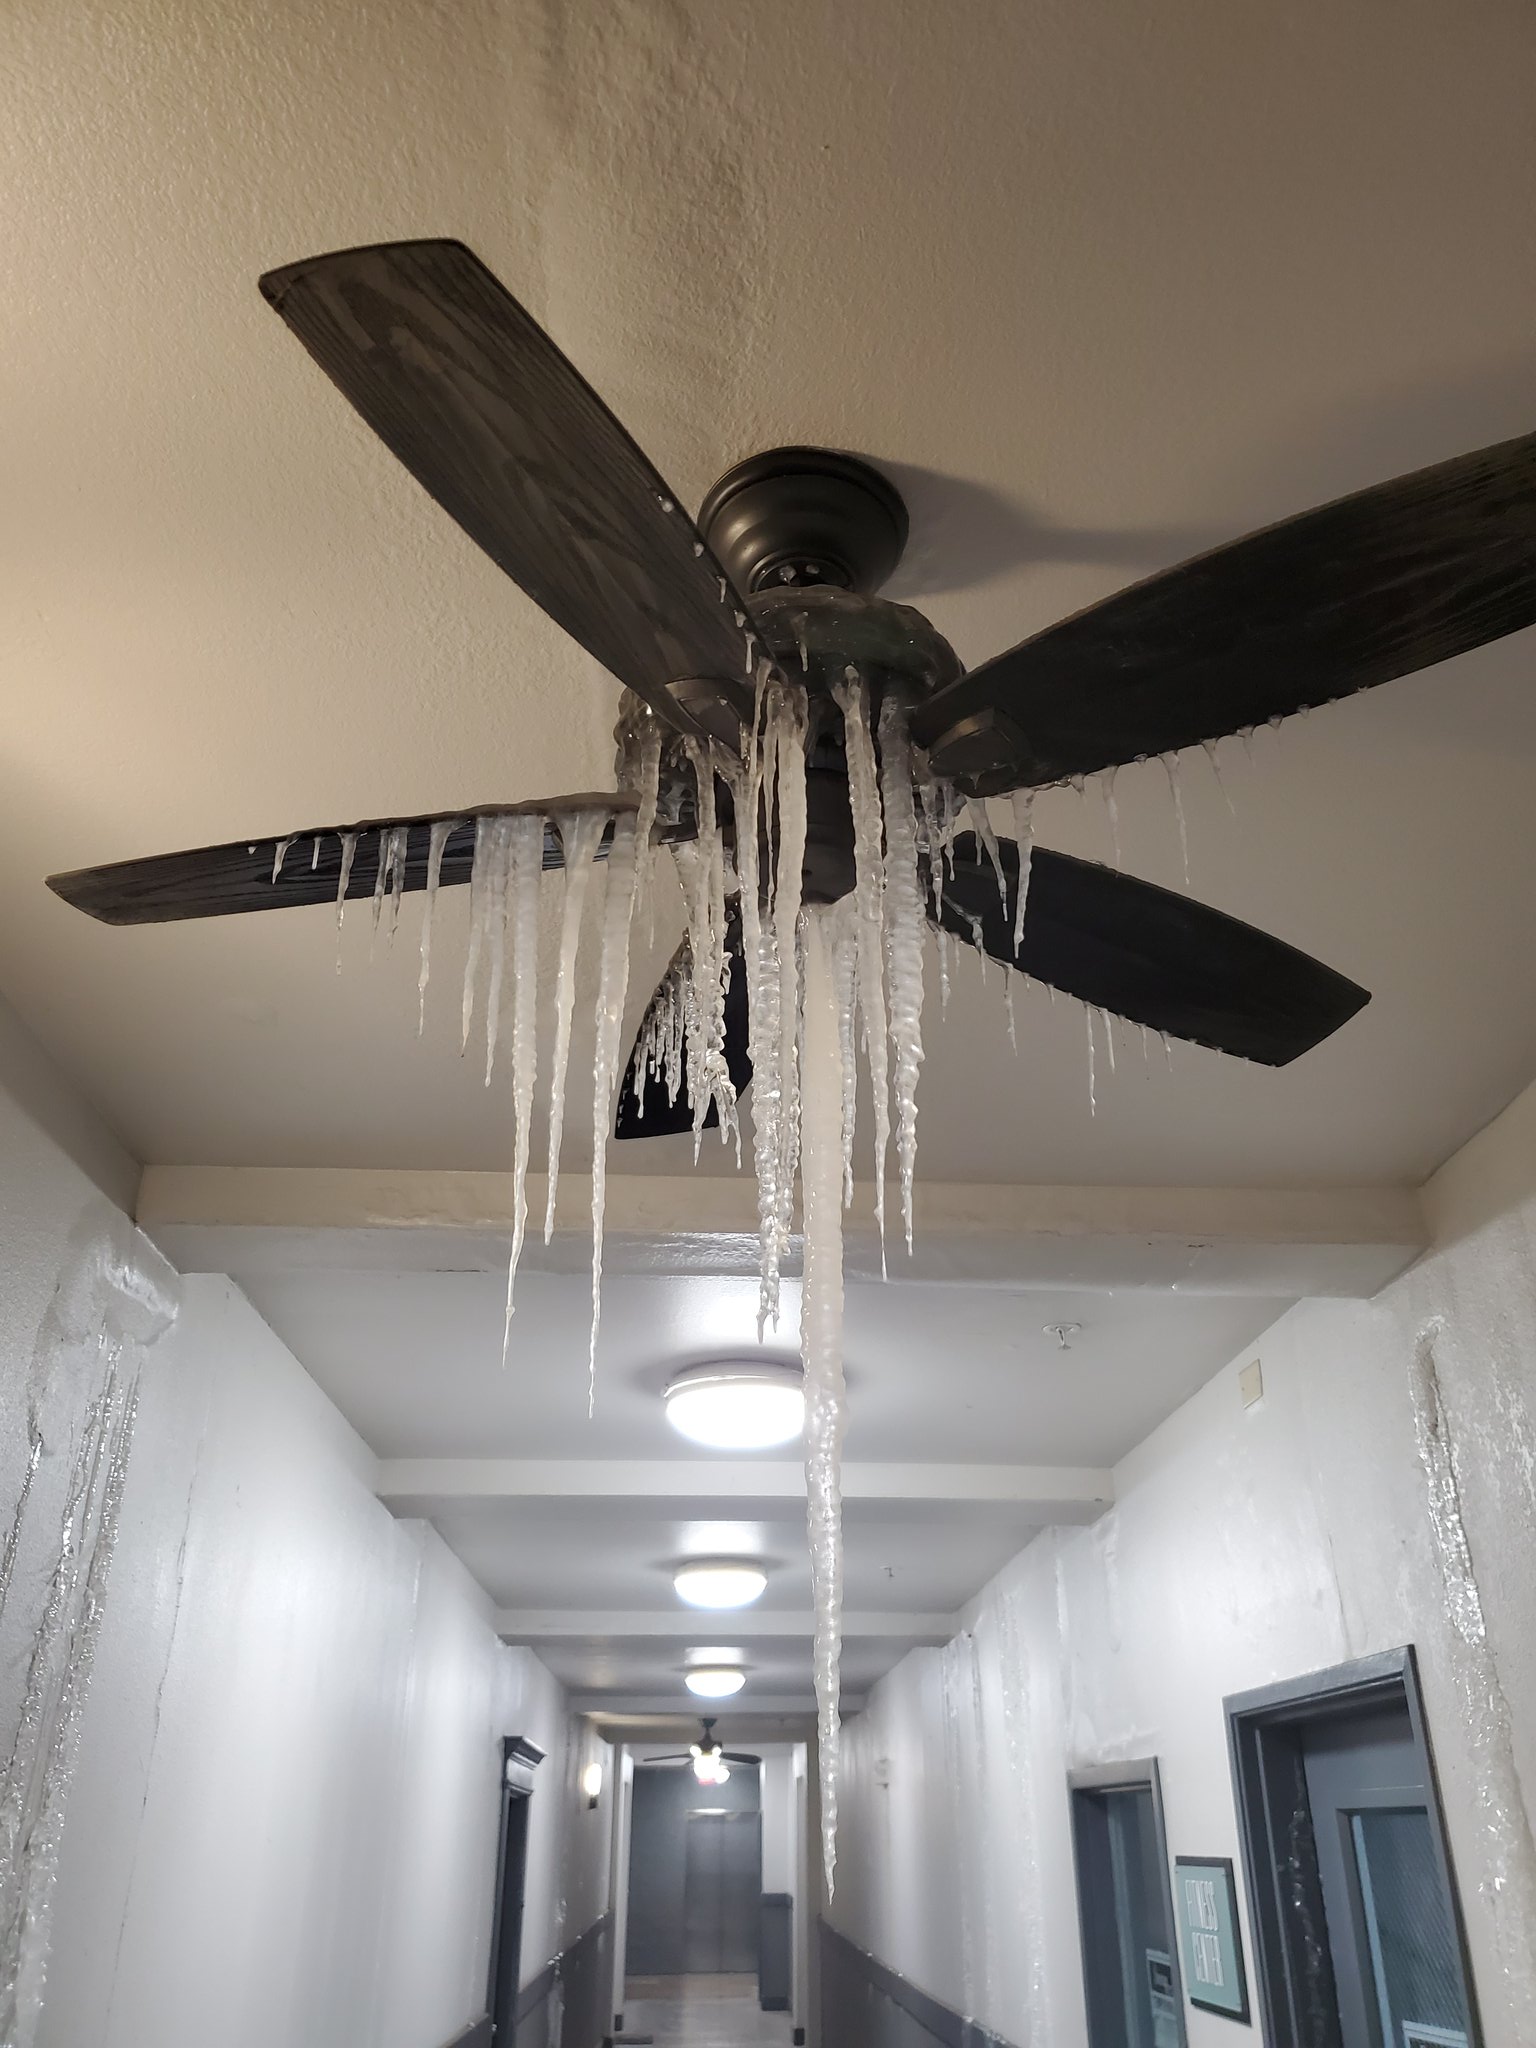 Icicles form on a ceiling fan in the hallway of an uptown Dallas apartment building during Winter Storm Uri, 15 February 2021. Photo: Thomas Black / Twitter